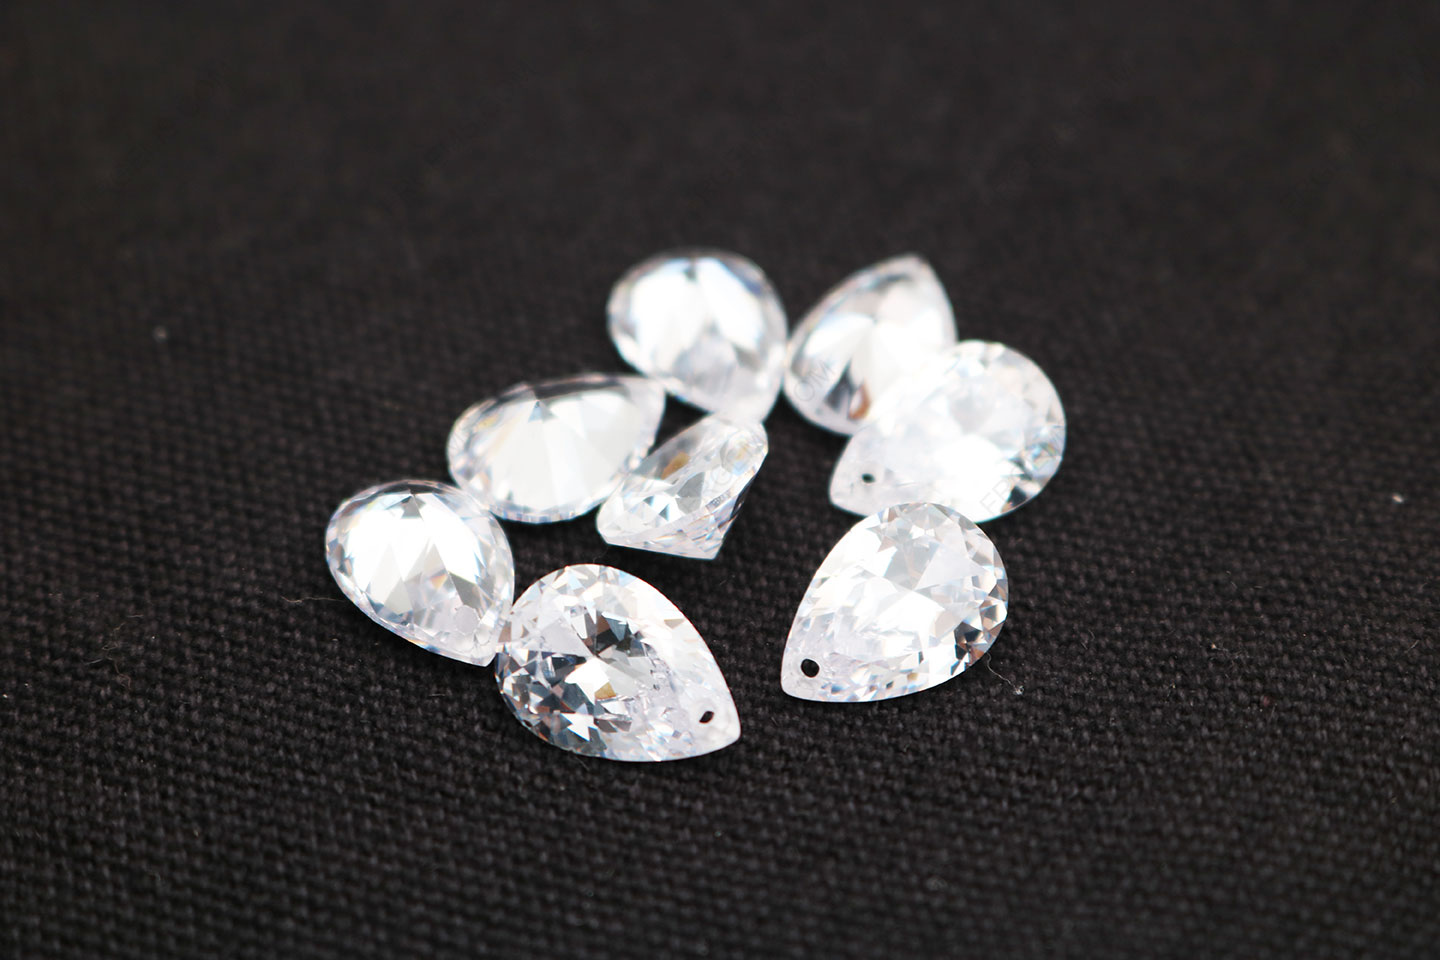 Cubic Zirconia White Color Pear Shape Faceted diamond Cut drilled holes 10x7mm stones CZ01 IMG_0995